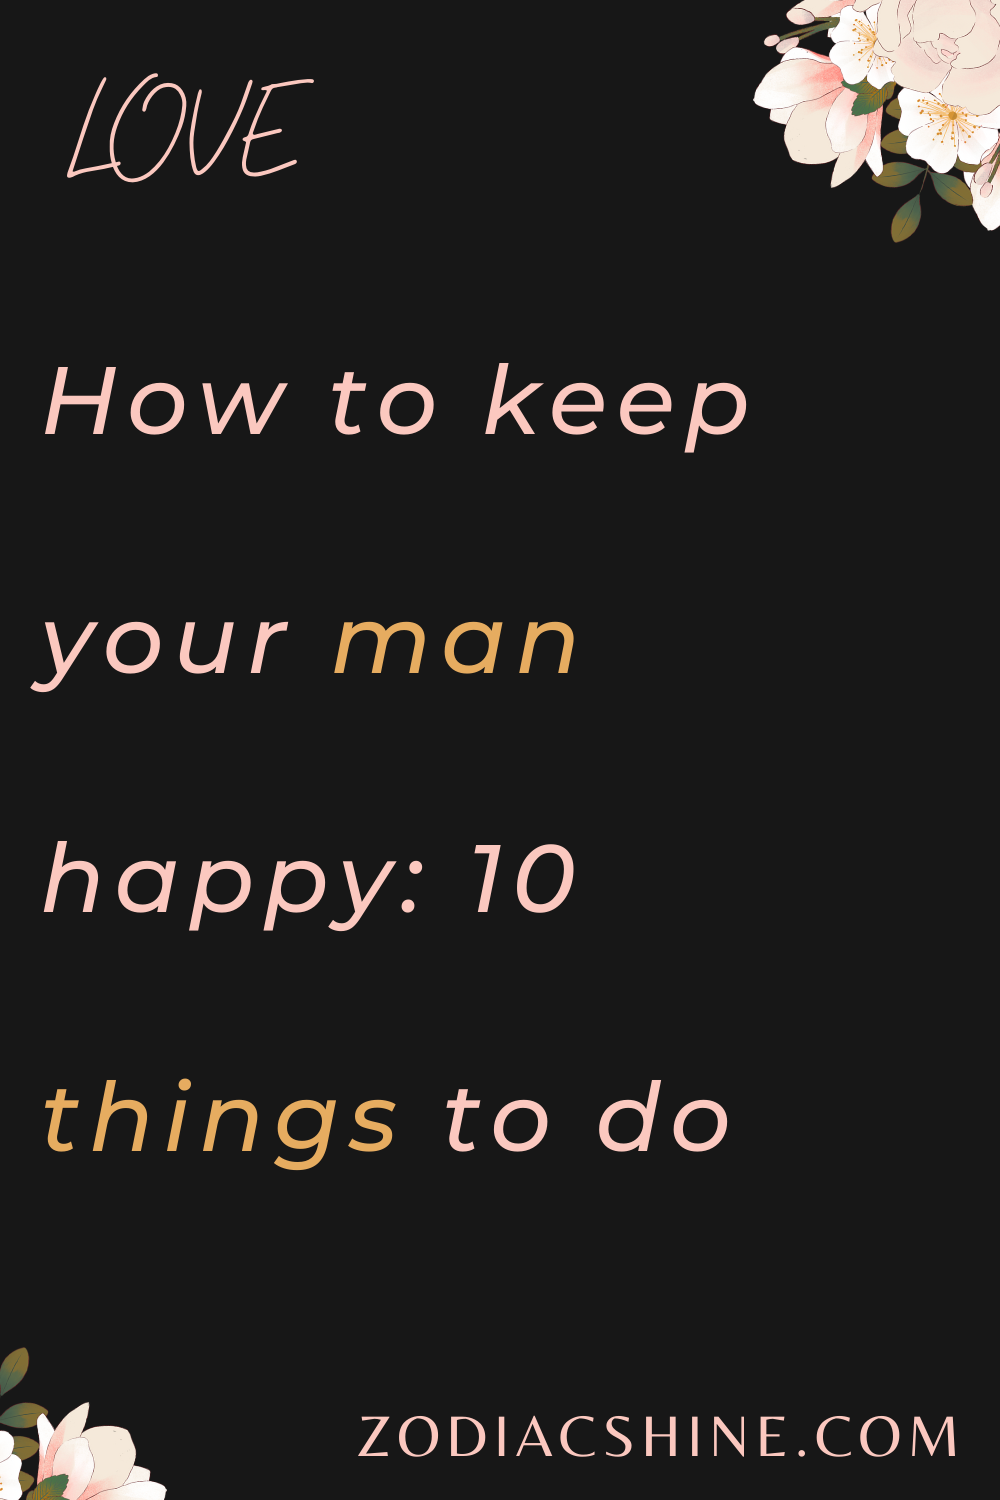 How to keep your man happy: 10 things to do